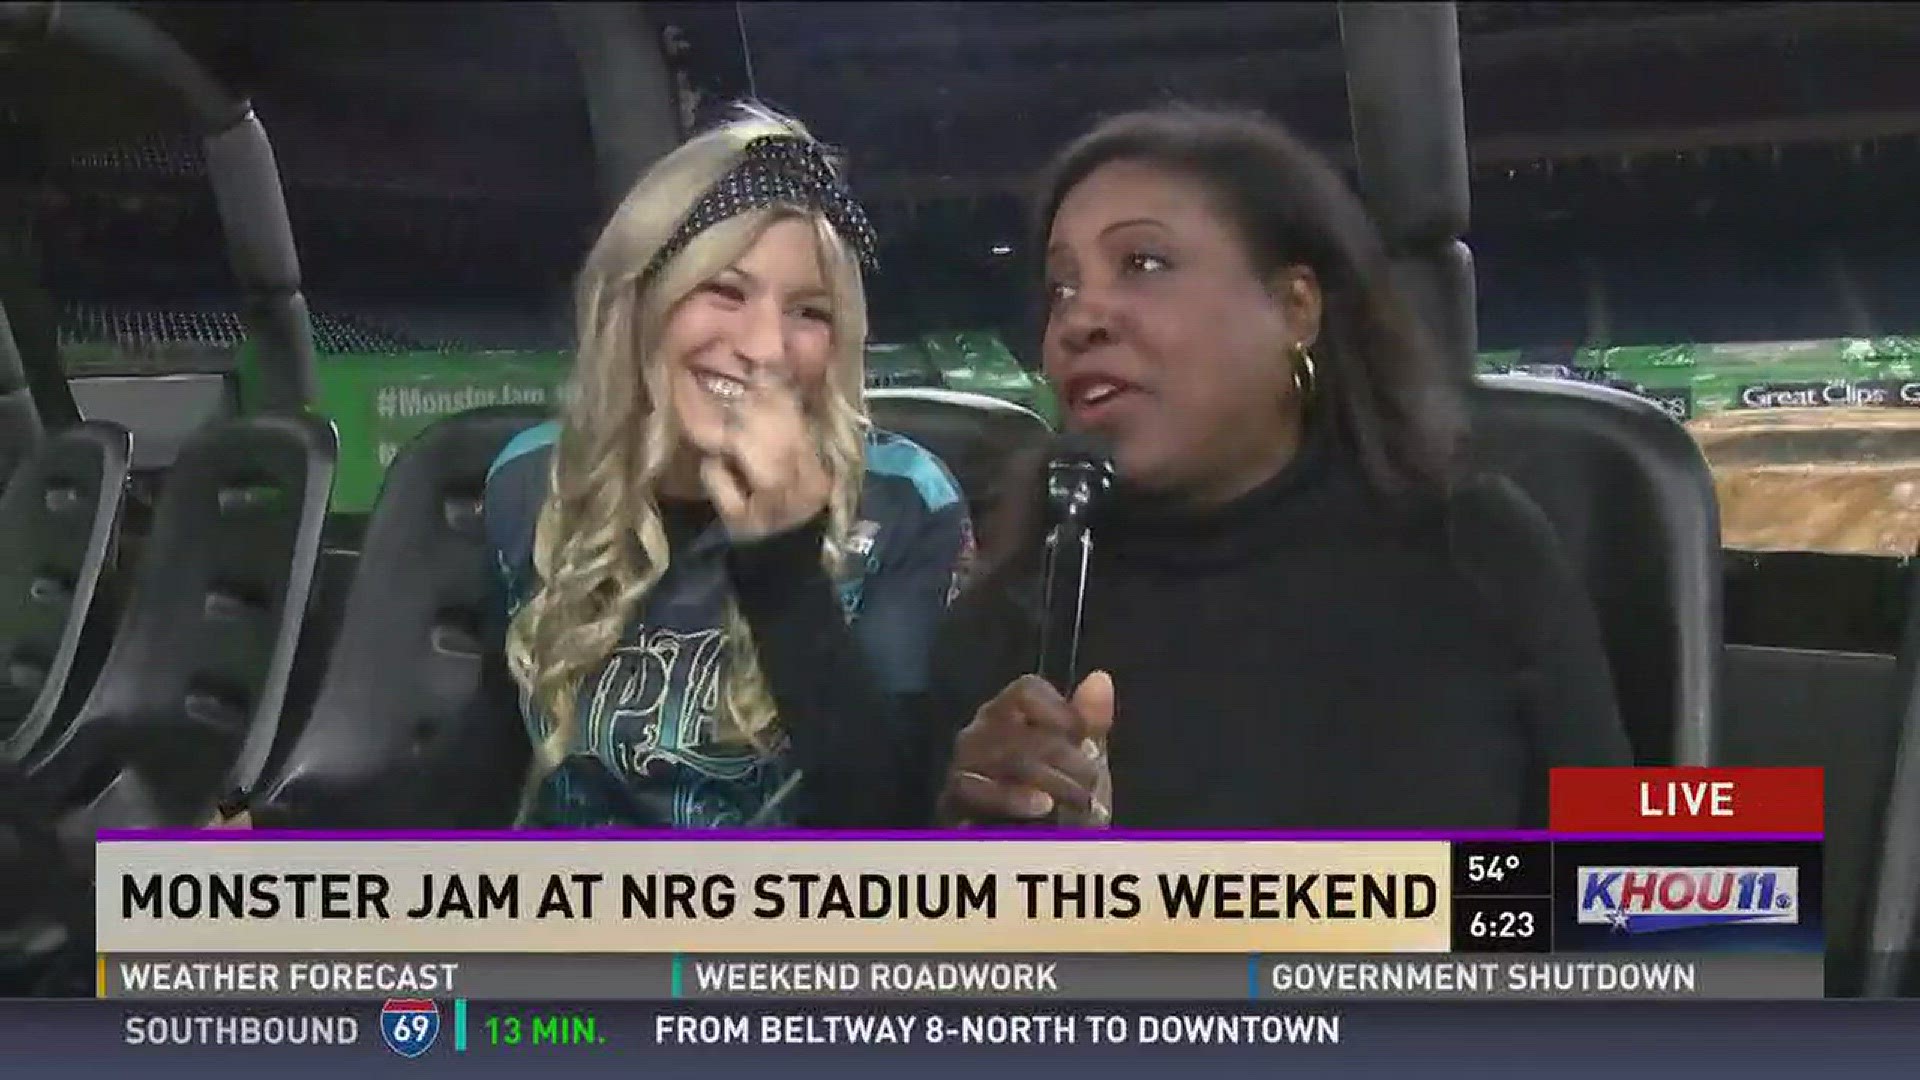 A preview of the action-packed show you can expect this weekend at Monster Jam at NRG Stadium.